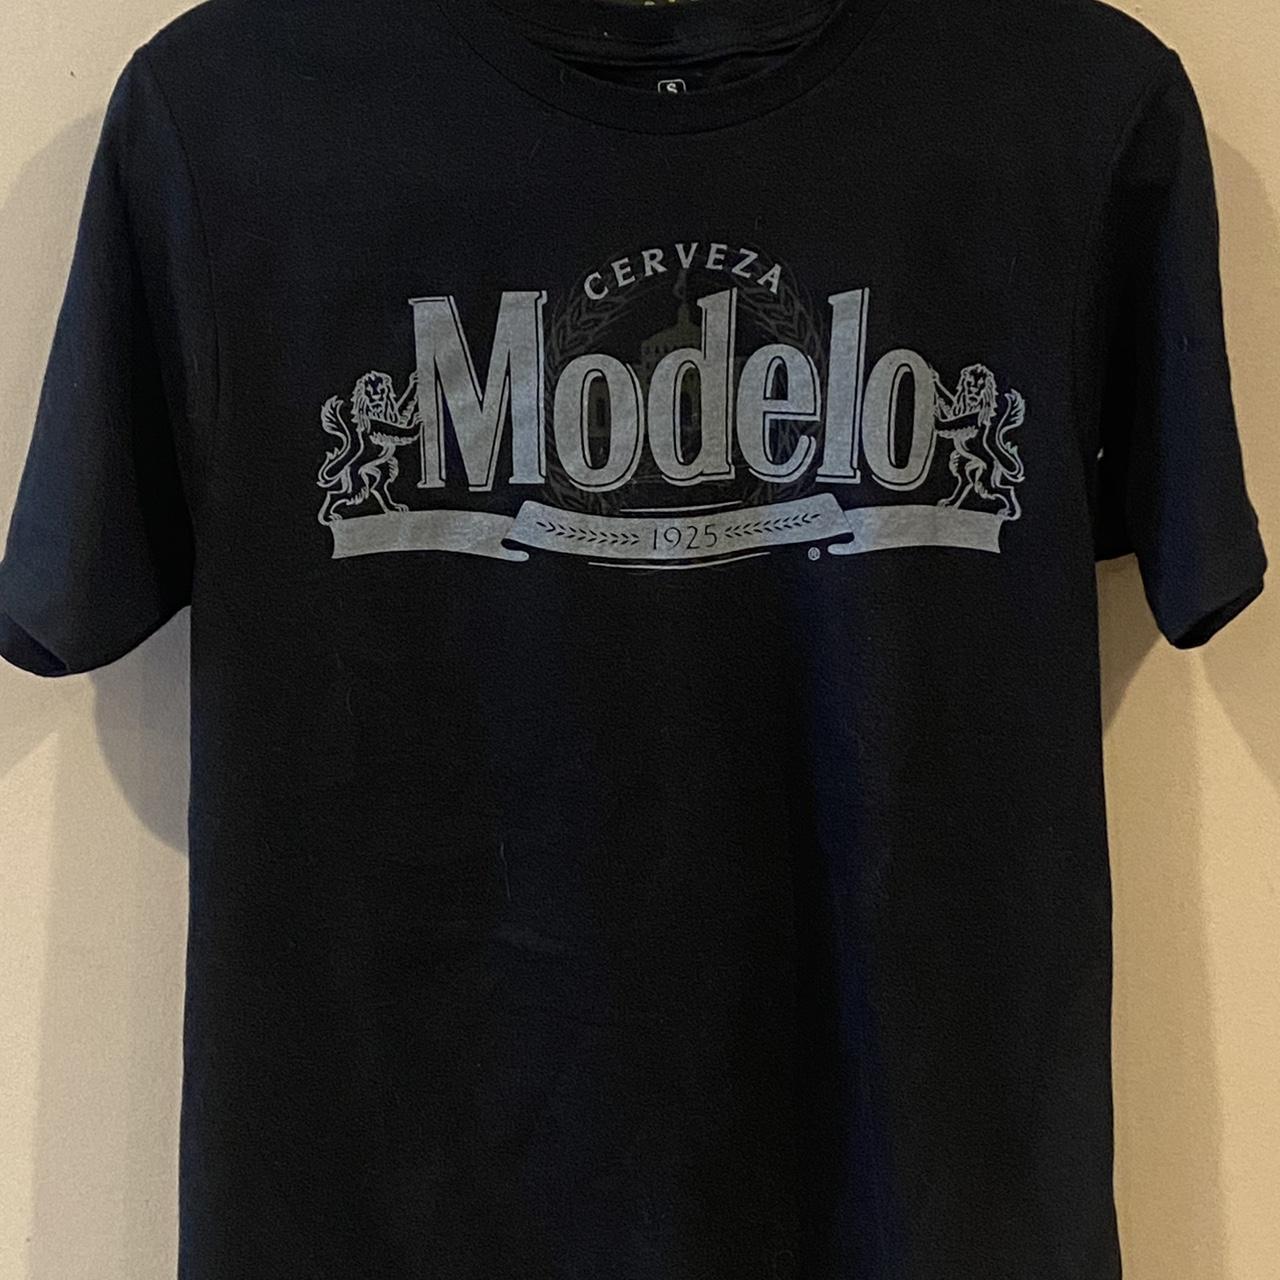 New modelo shirt wore it once not the fit I... - Depop